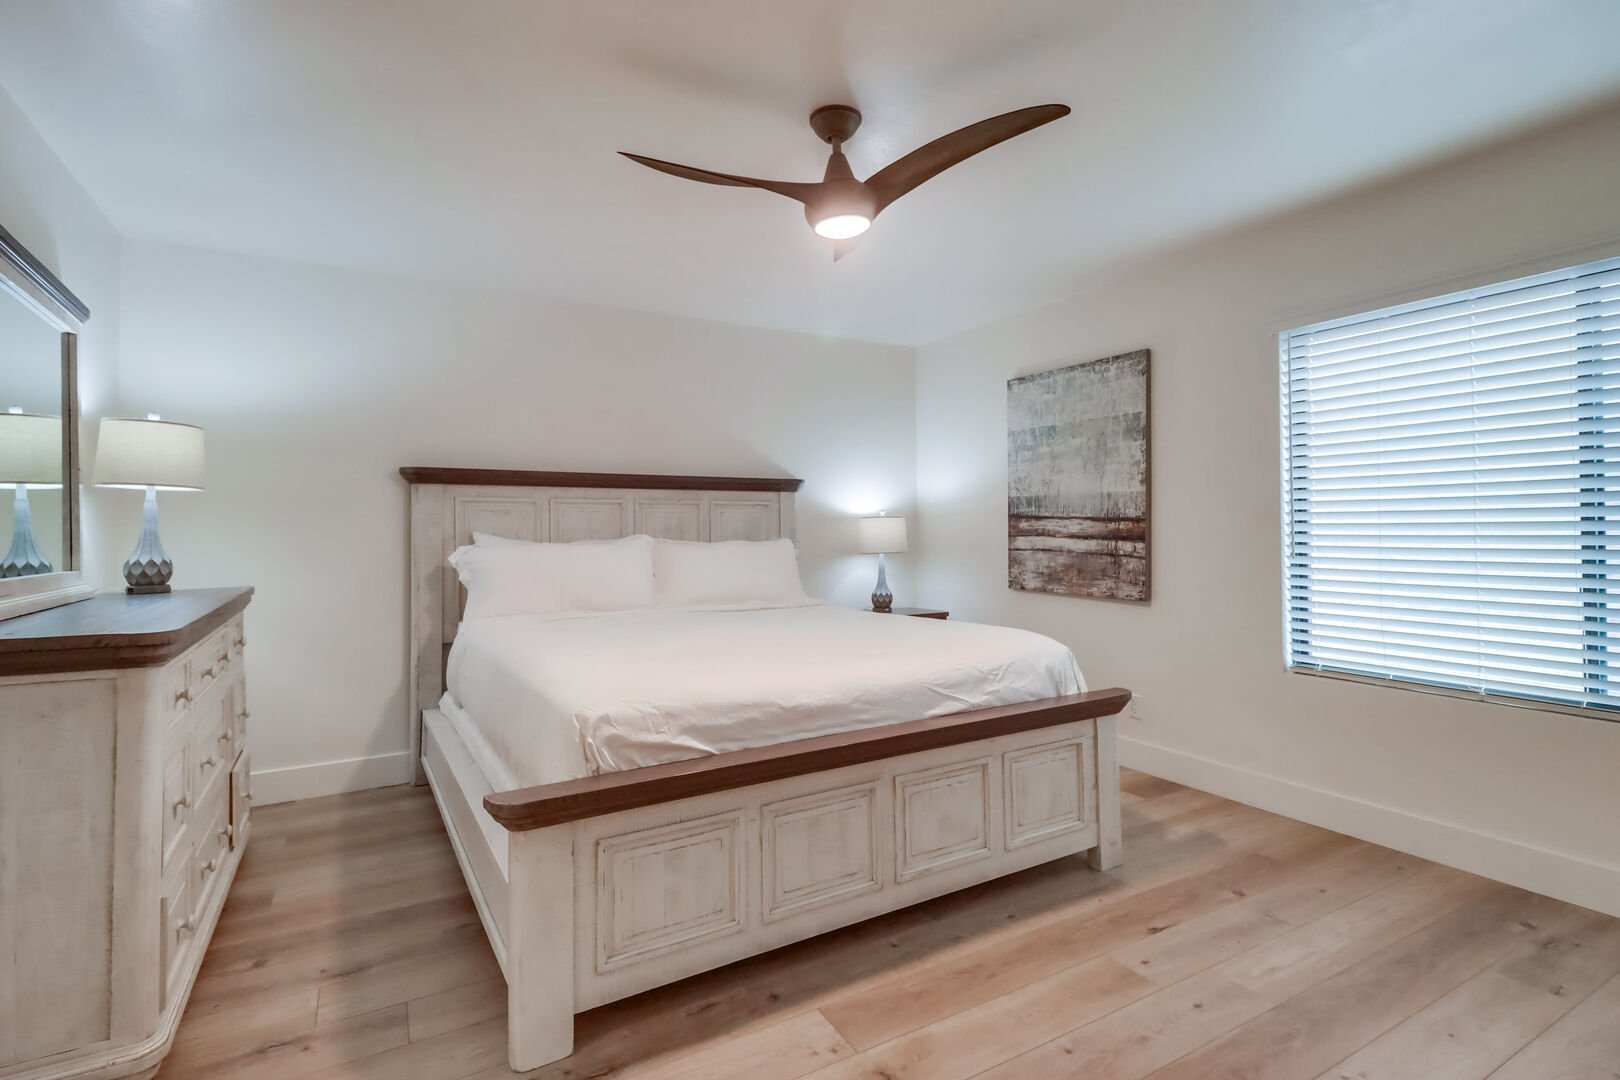 Master bedroom with king bed, ceiling fan, dresser, smart TV, walk-in closet and in-suite full bathroom